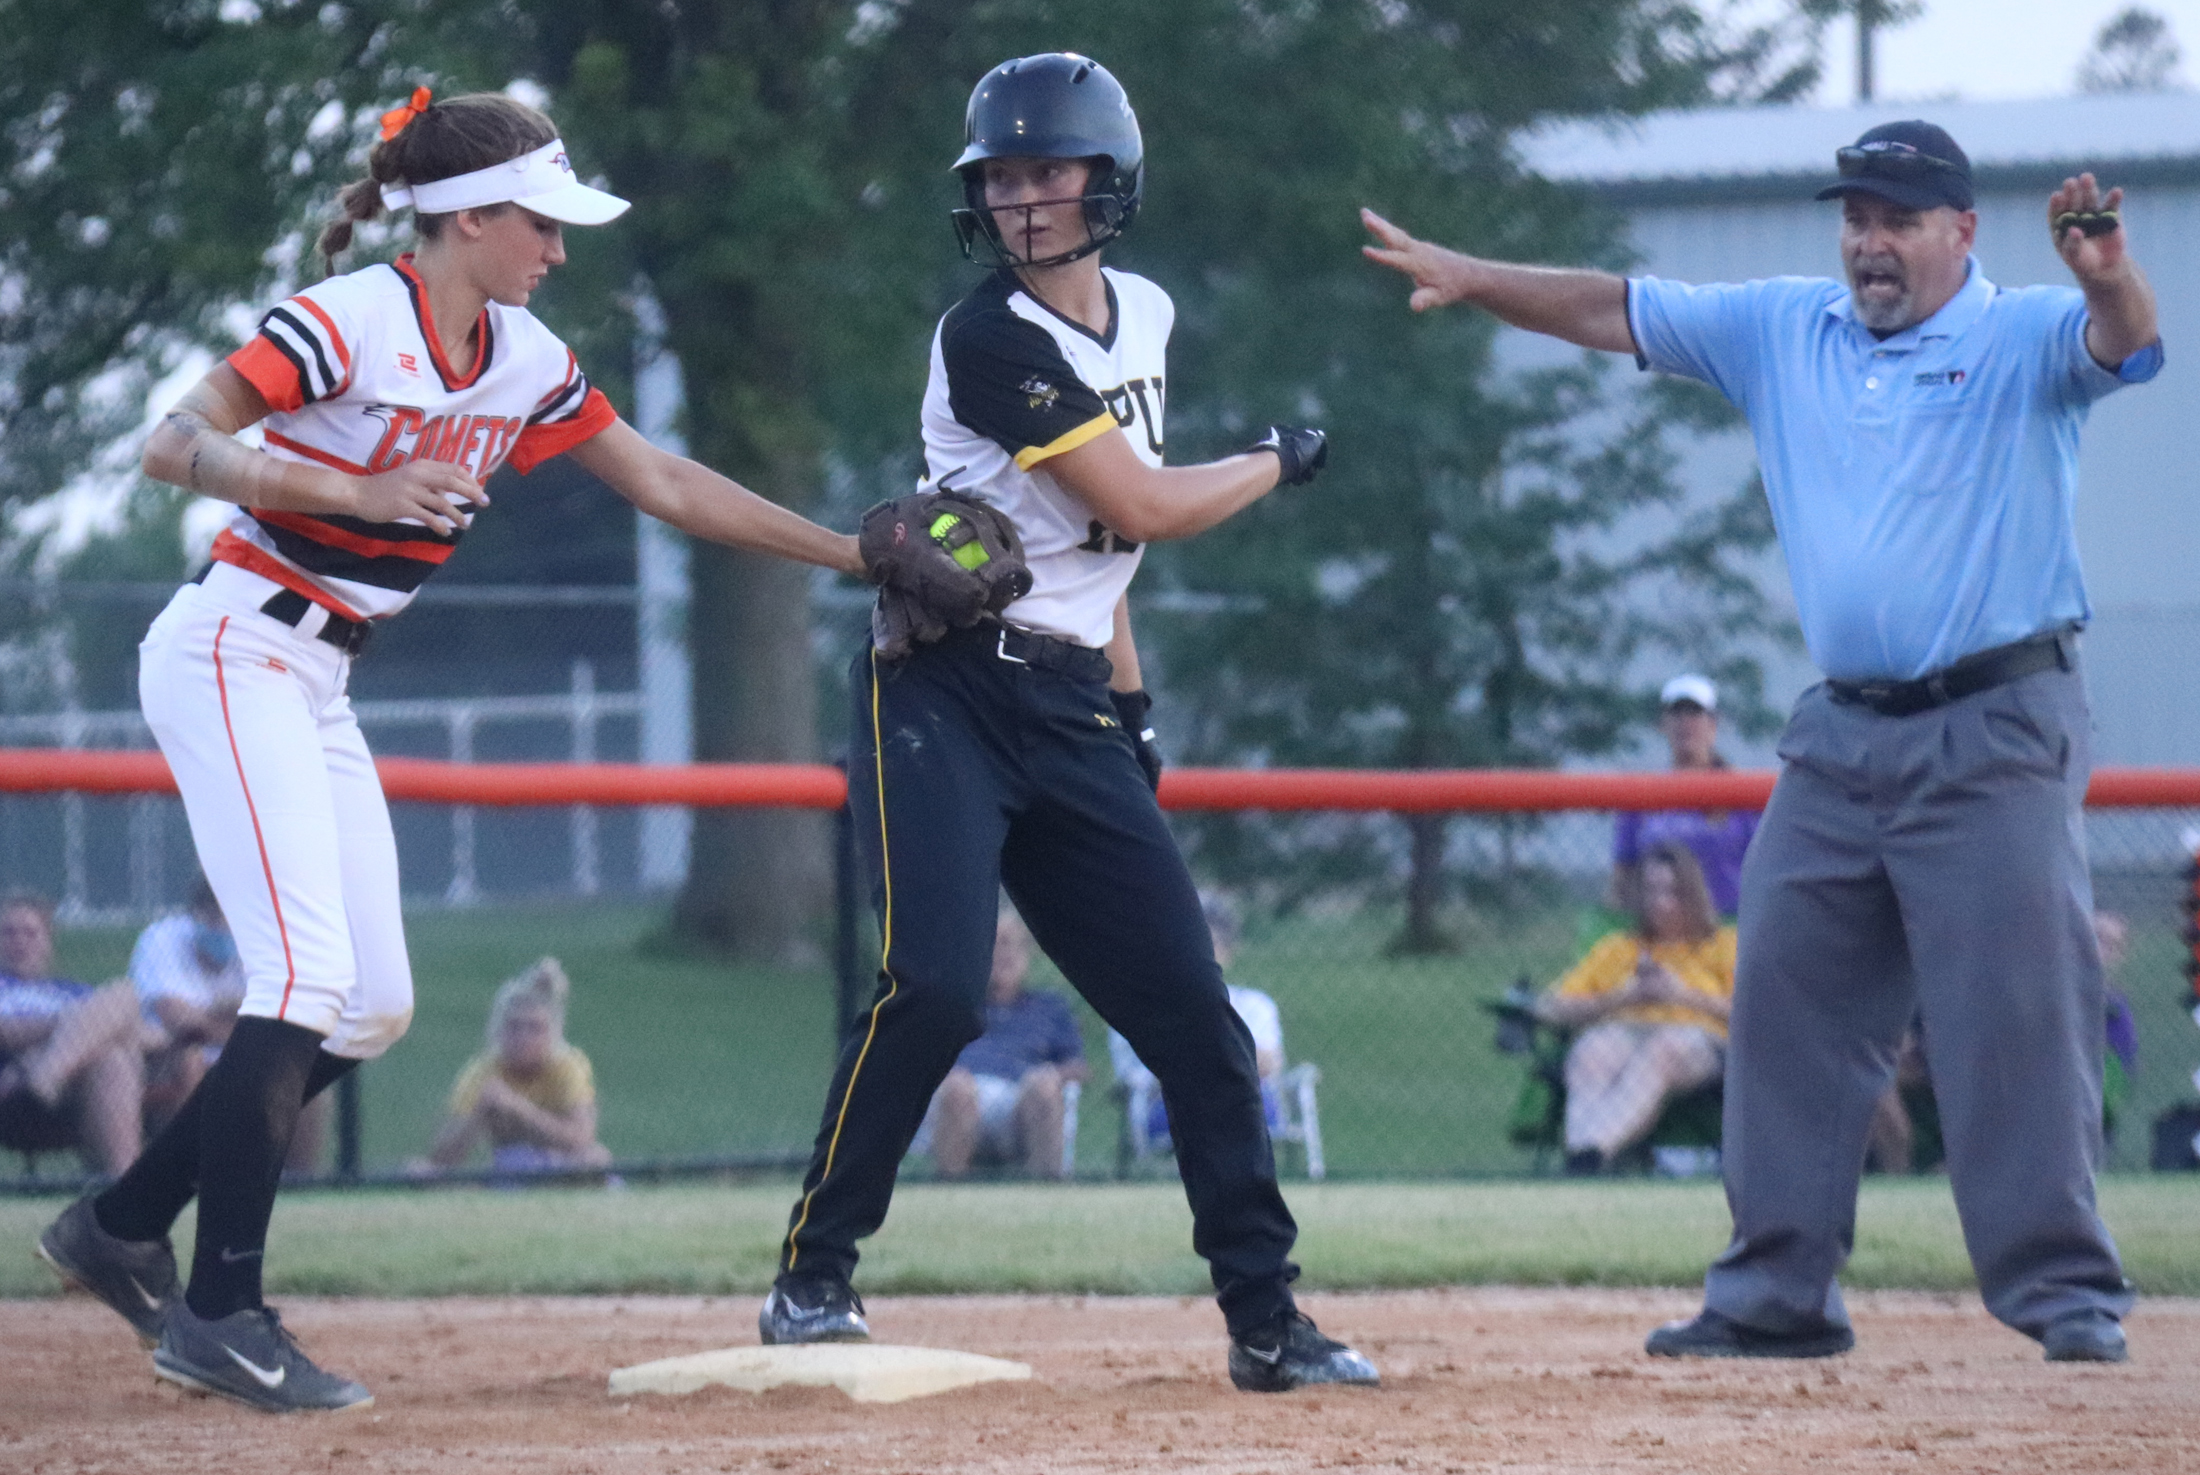 Comets pound Pointers 11-3, advance to regional finals